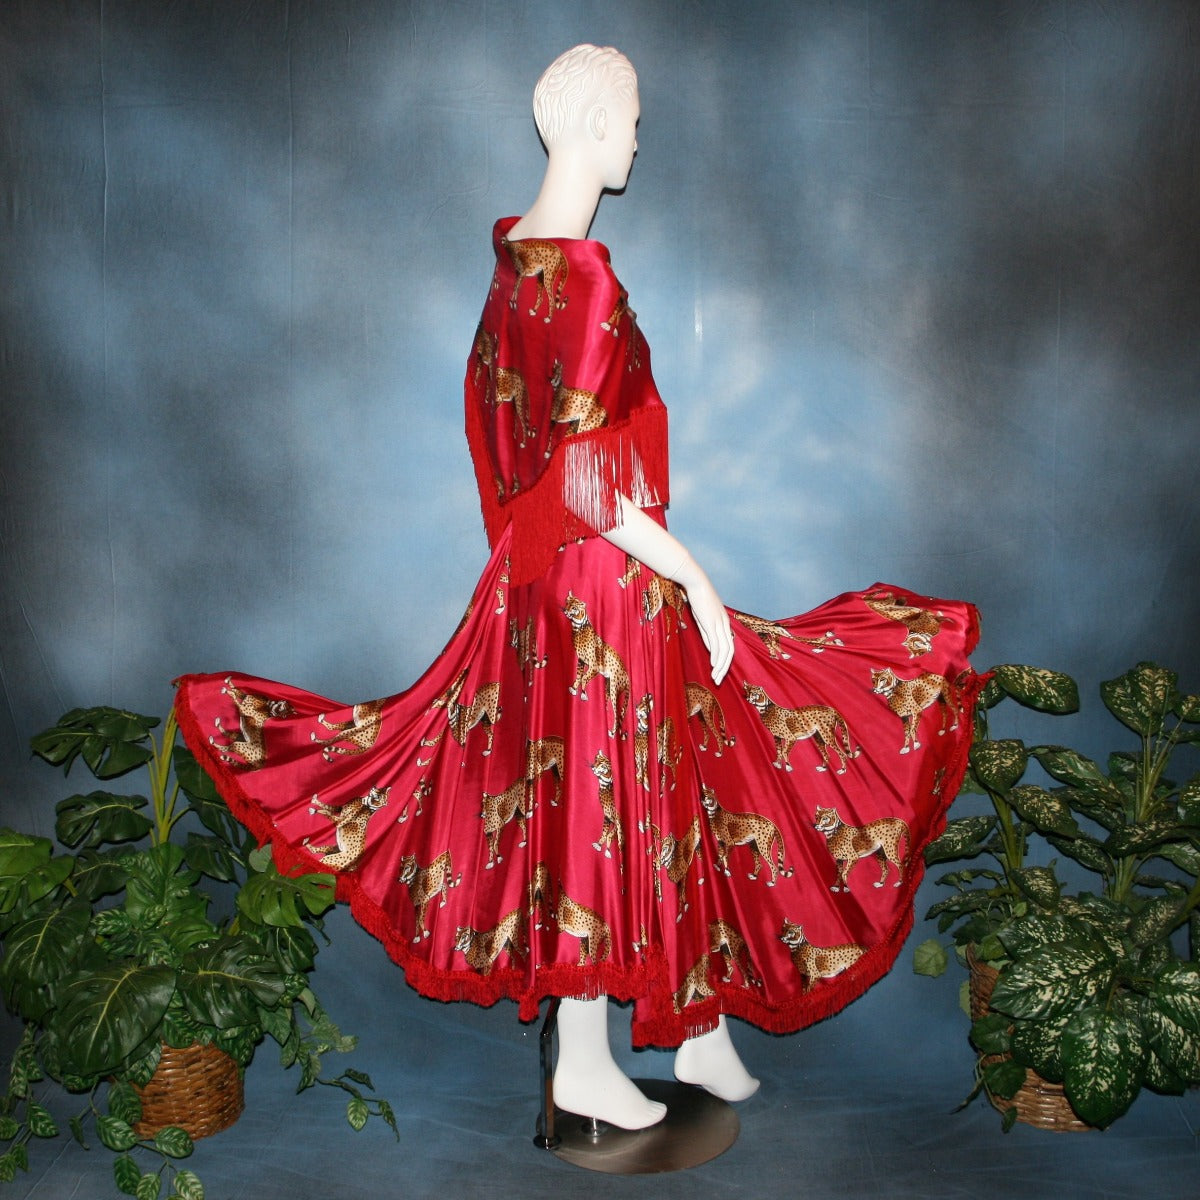 back side view of Red full circle ballroom skirt with chainette fringe was created of red satin with cheetah print along with matching shawl to team with a bodysuit or top. I can envision custom creating a body suit of cheetah fabric to team with this...actually would be fun to create a few to mix & match with this ballroom skirt set...some with Swarovski work!!